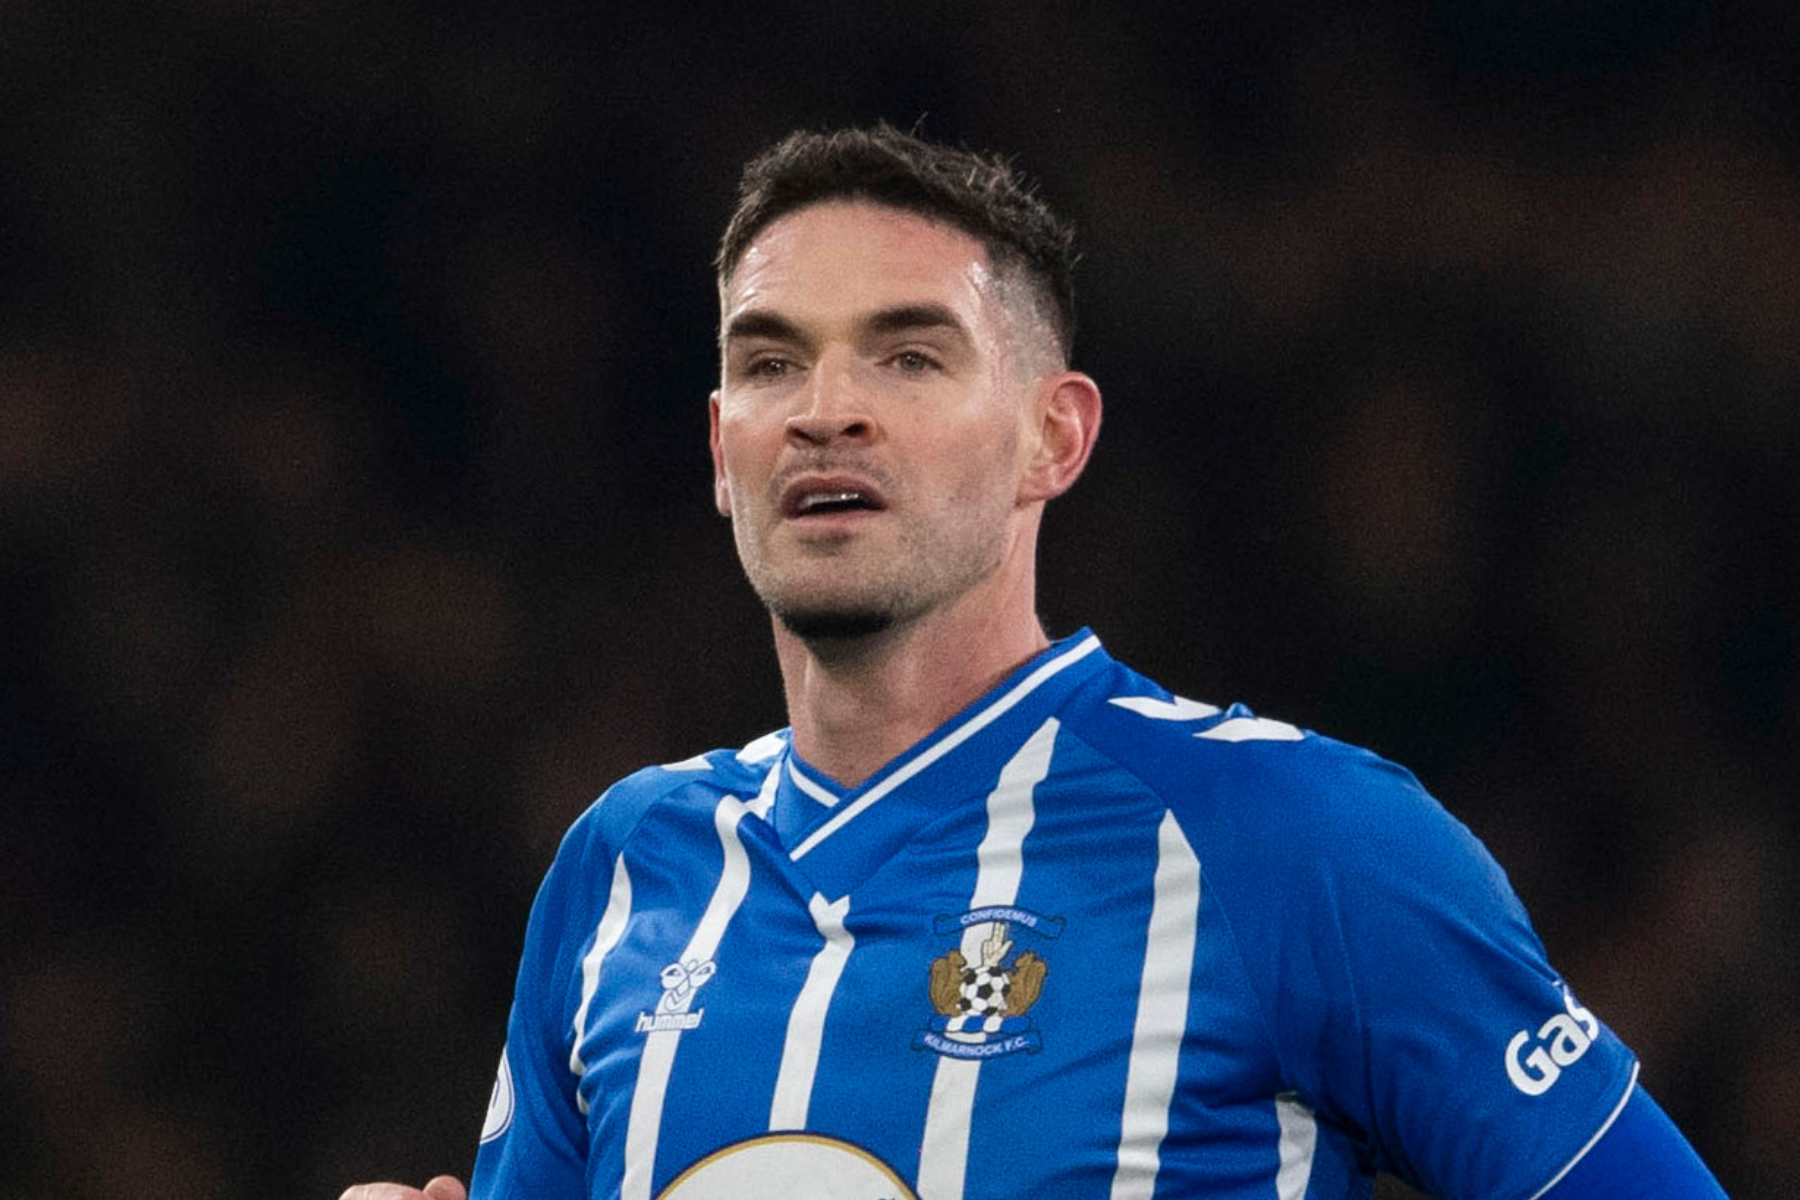 Kyle Lafferty leaves Kilmarnock by 'mutual consent' on deadline day